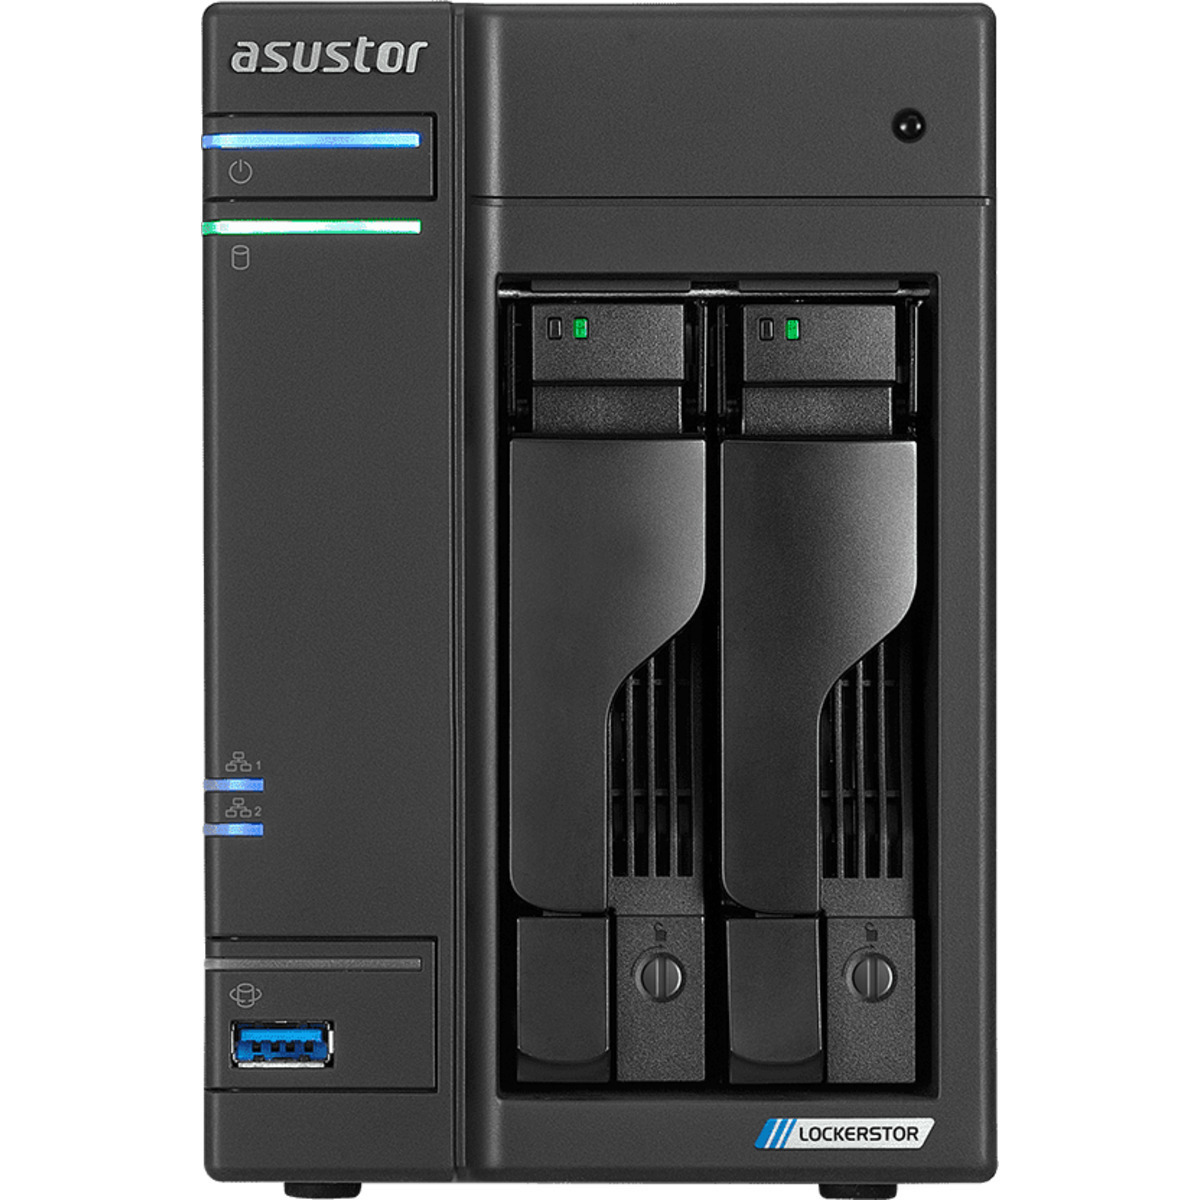 buy $1463 ASUSTOR AS6602T Lockerstor 2 24tb Desktop NAS - Network Attached Storage Device 2x12000gb Western Digital Red Pro WD121KFBX 3.5 7200rpm SATA 6Gb/s HDD NAS Class Drives Installed - Burn-In Tested - FREE RAM UPGRADE - nas headquarters buy network attached storage server device das new raid-5 free shipping usa christmas new year holiday sale AS6602T Lockerstor 2